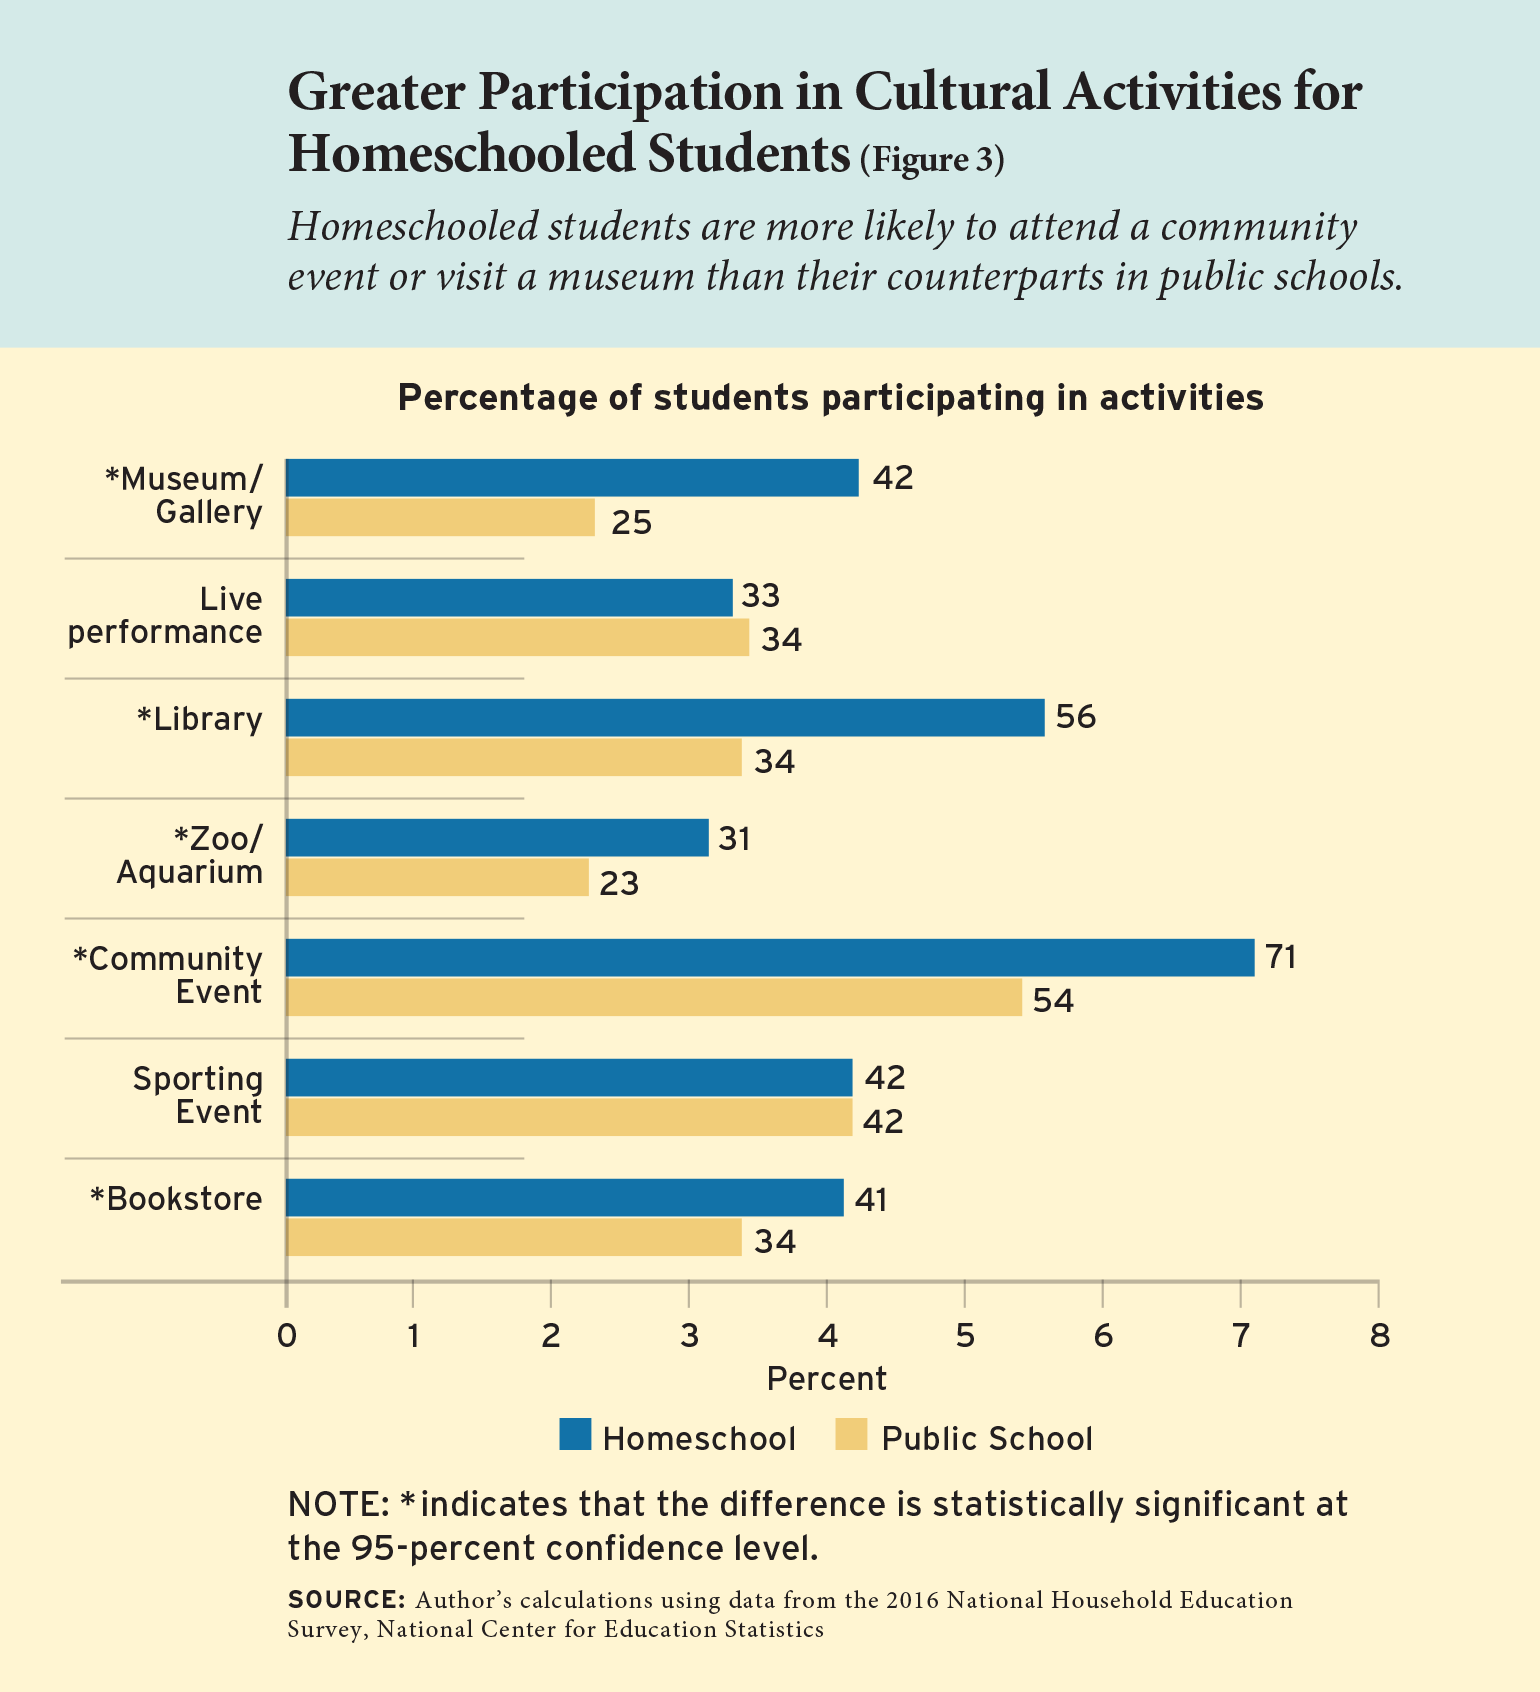 Figure 3: Greater Participation in Cultural Activities for Homeschooled Students